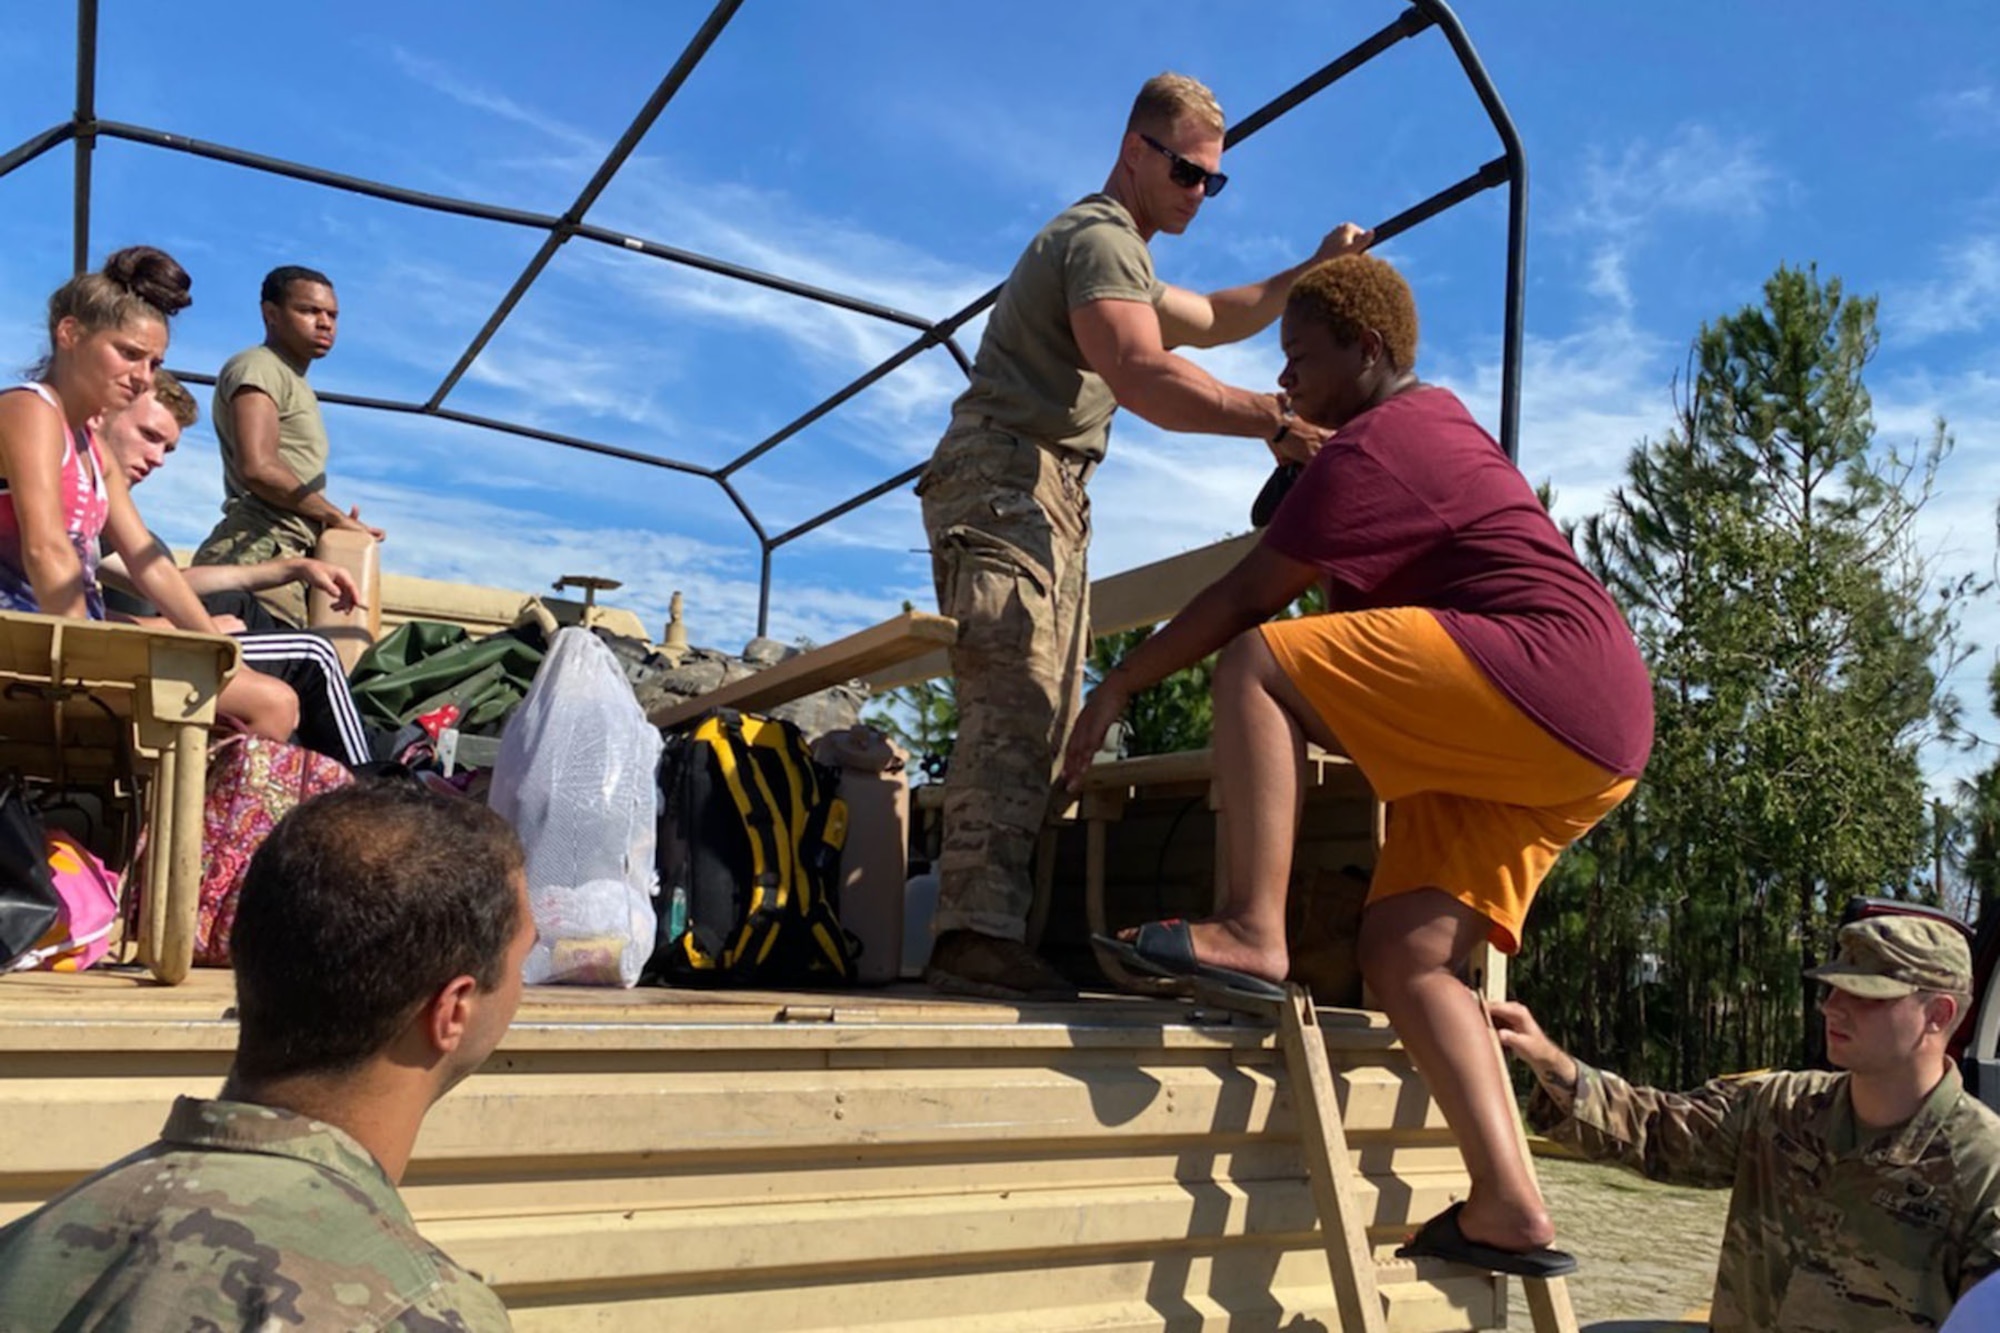 More than 6,200 members of the Louisiana National Guard are helping civilian authorities respond to the aftermath of Hurricane Laura, which made landfall in southwest Louisiana Aug. 27, 2020.